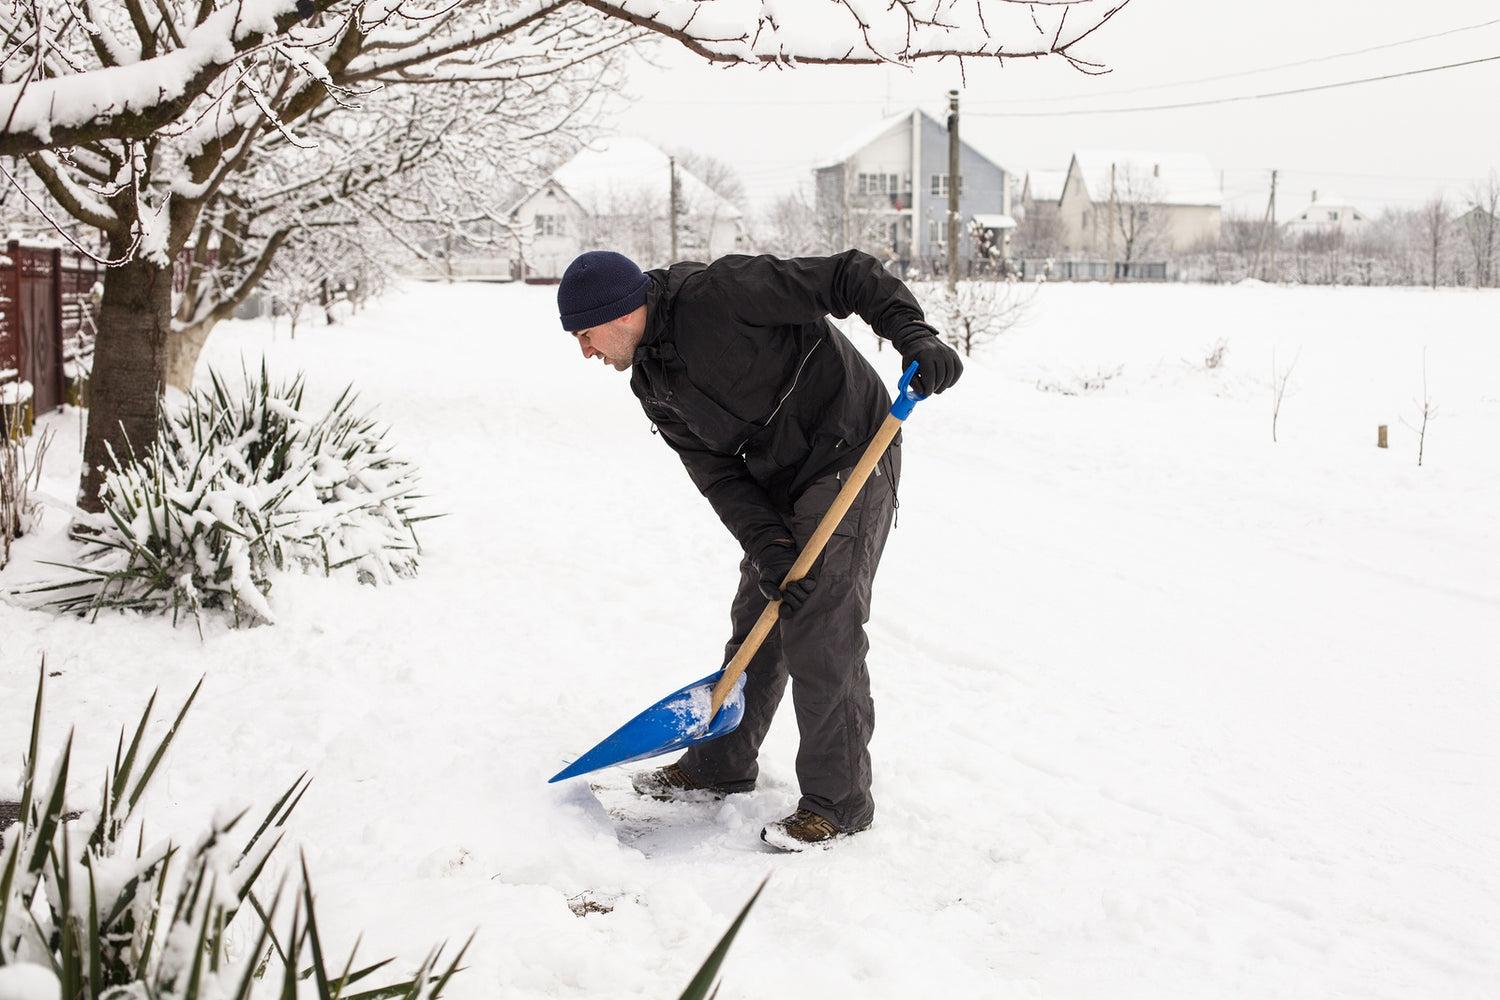 Back Problems Associated with Shoveling Snow